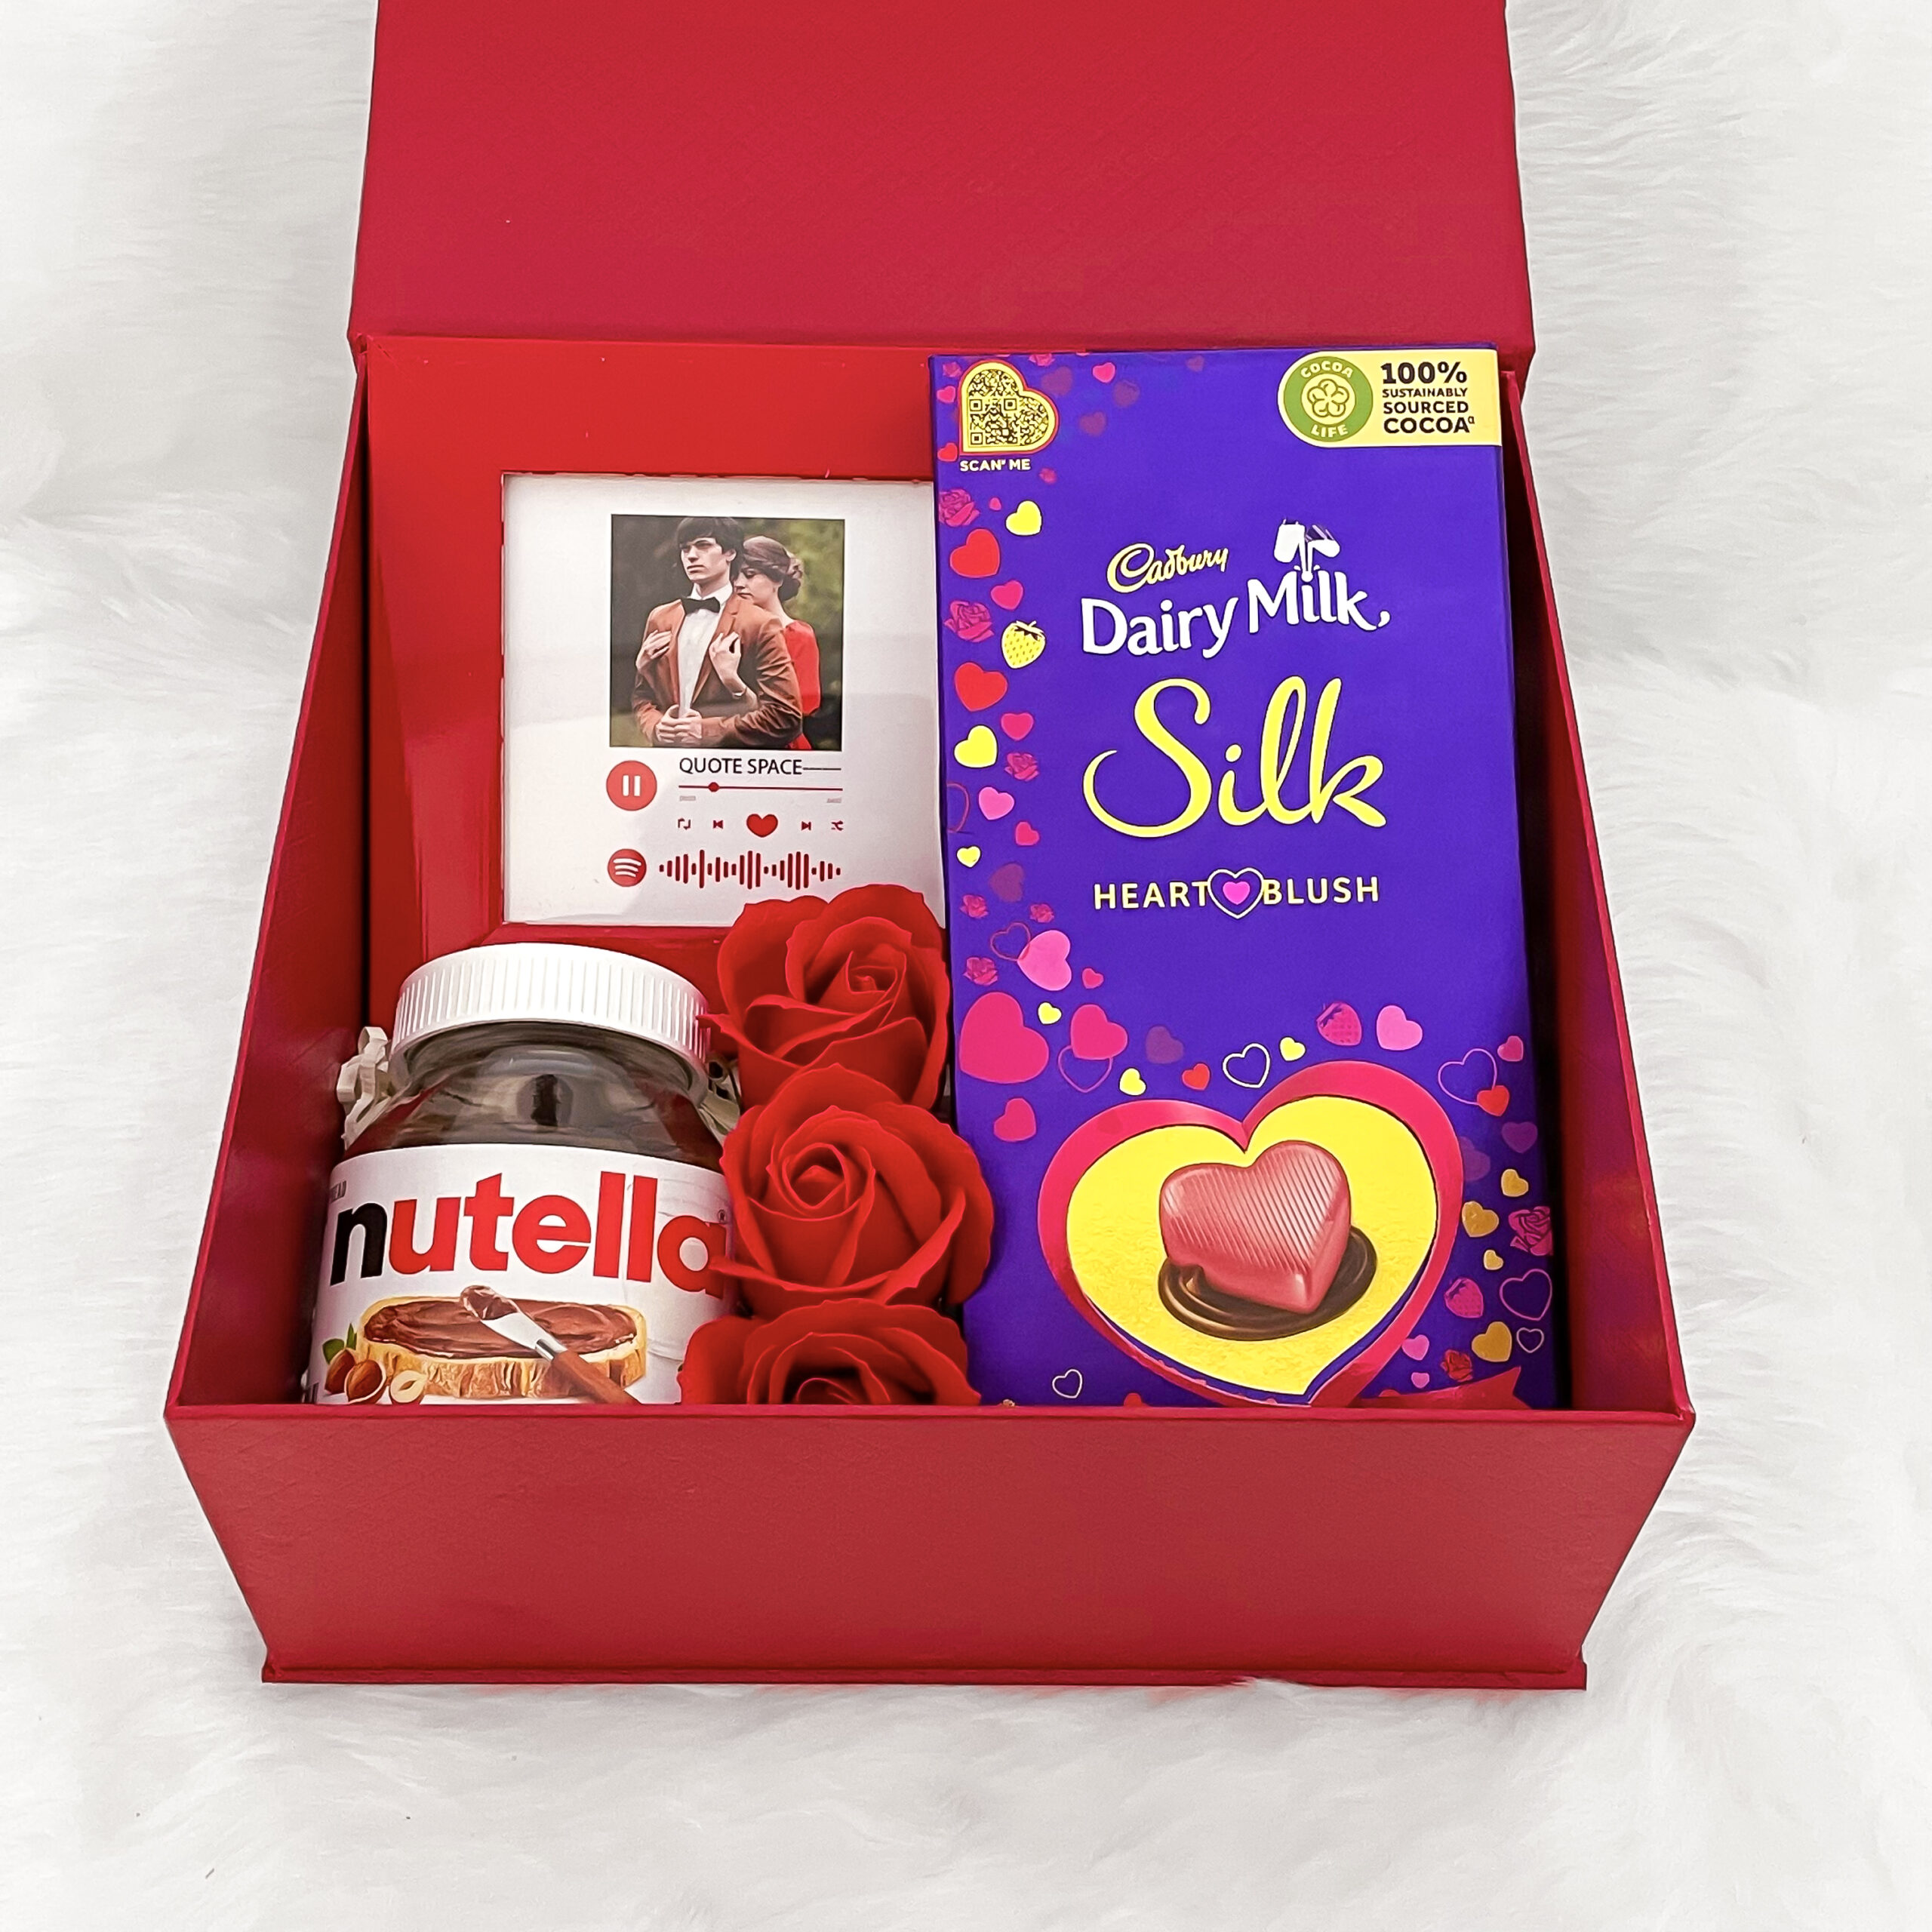 5 Chocolate Day Gifts Ideas That Are Never to Fail in Impressing Your  Sweetheart! Giftalove Blog - Ideas, Inspiration, Latest trends to quick DIY  and easy how–tos